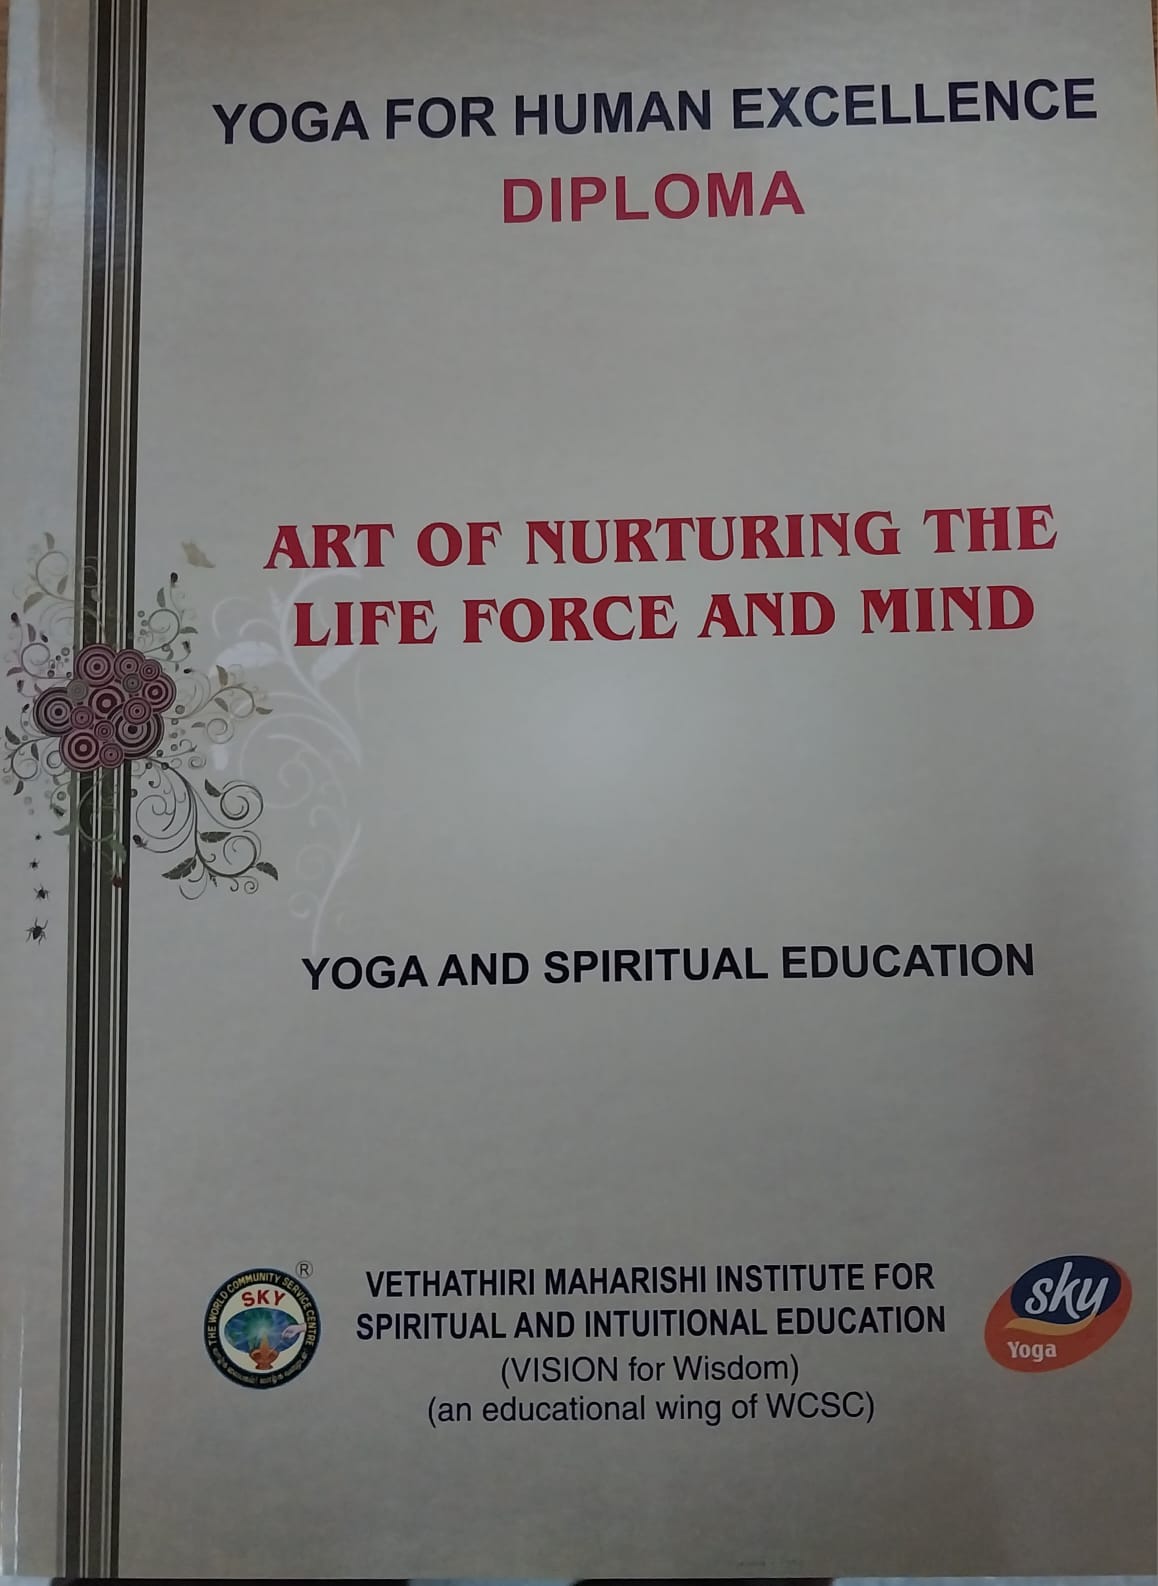 Art of Nurturing the life force and mind - English Diploma Books